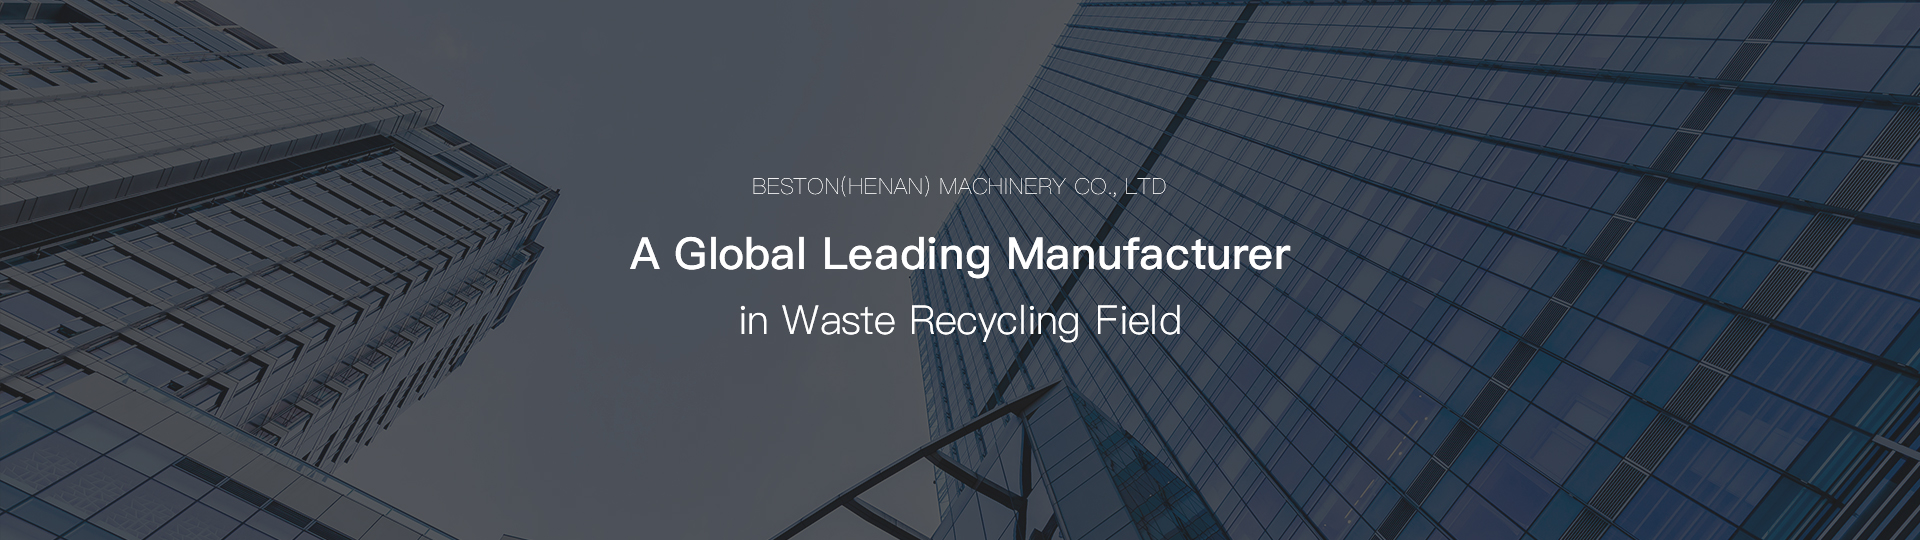 Beston Group - A World's Leading Manufacturer